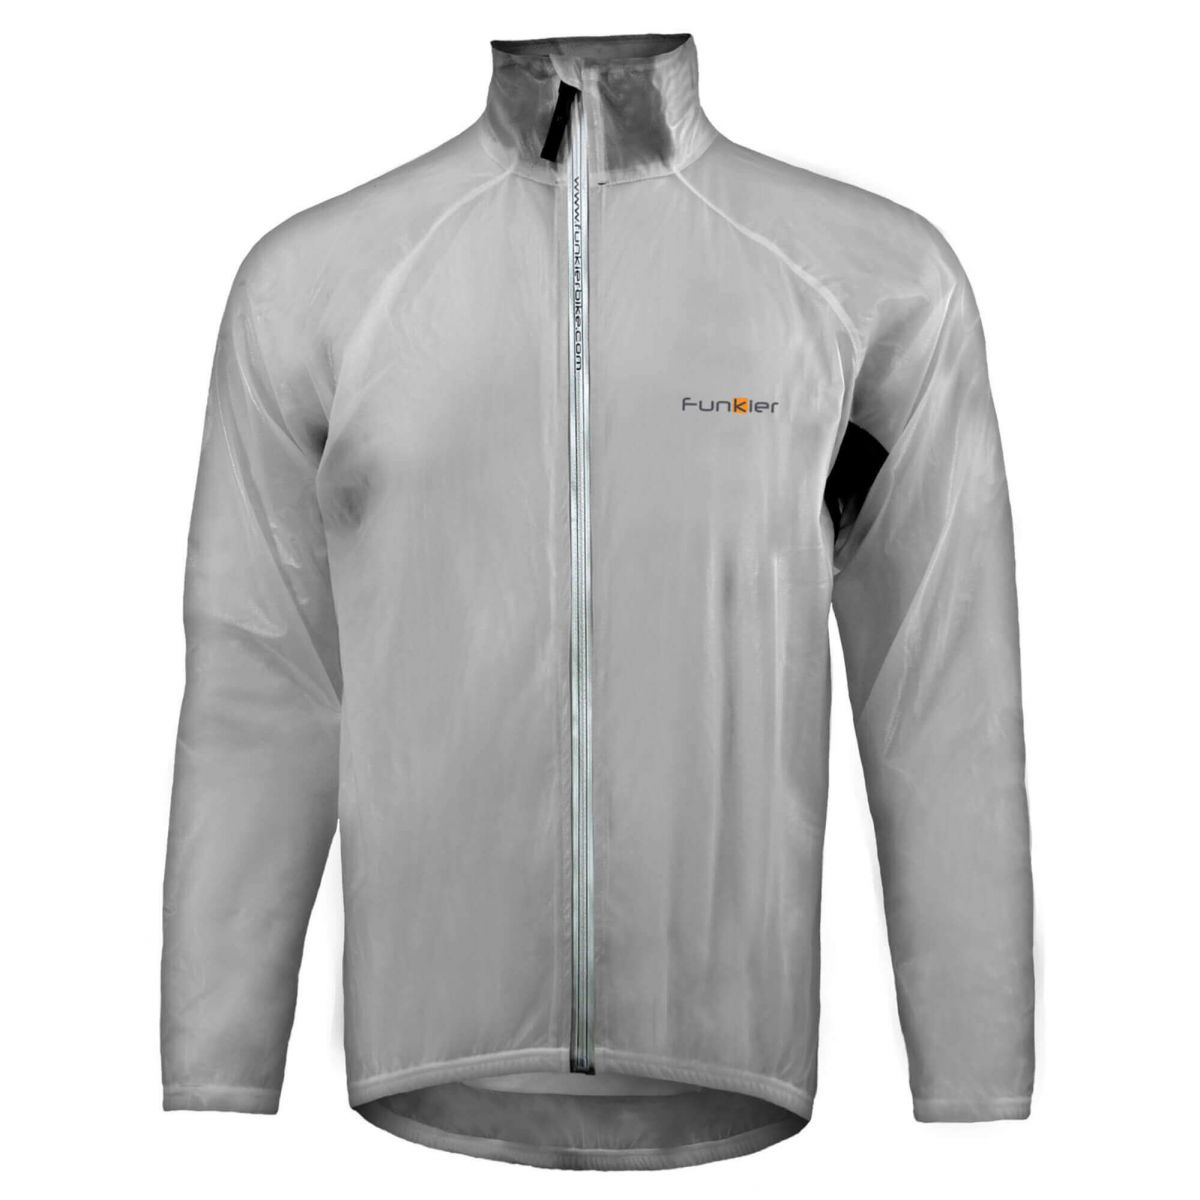 Campera Impermeable Ciclismo Funkier Lecco